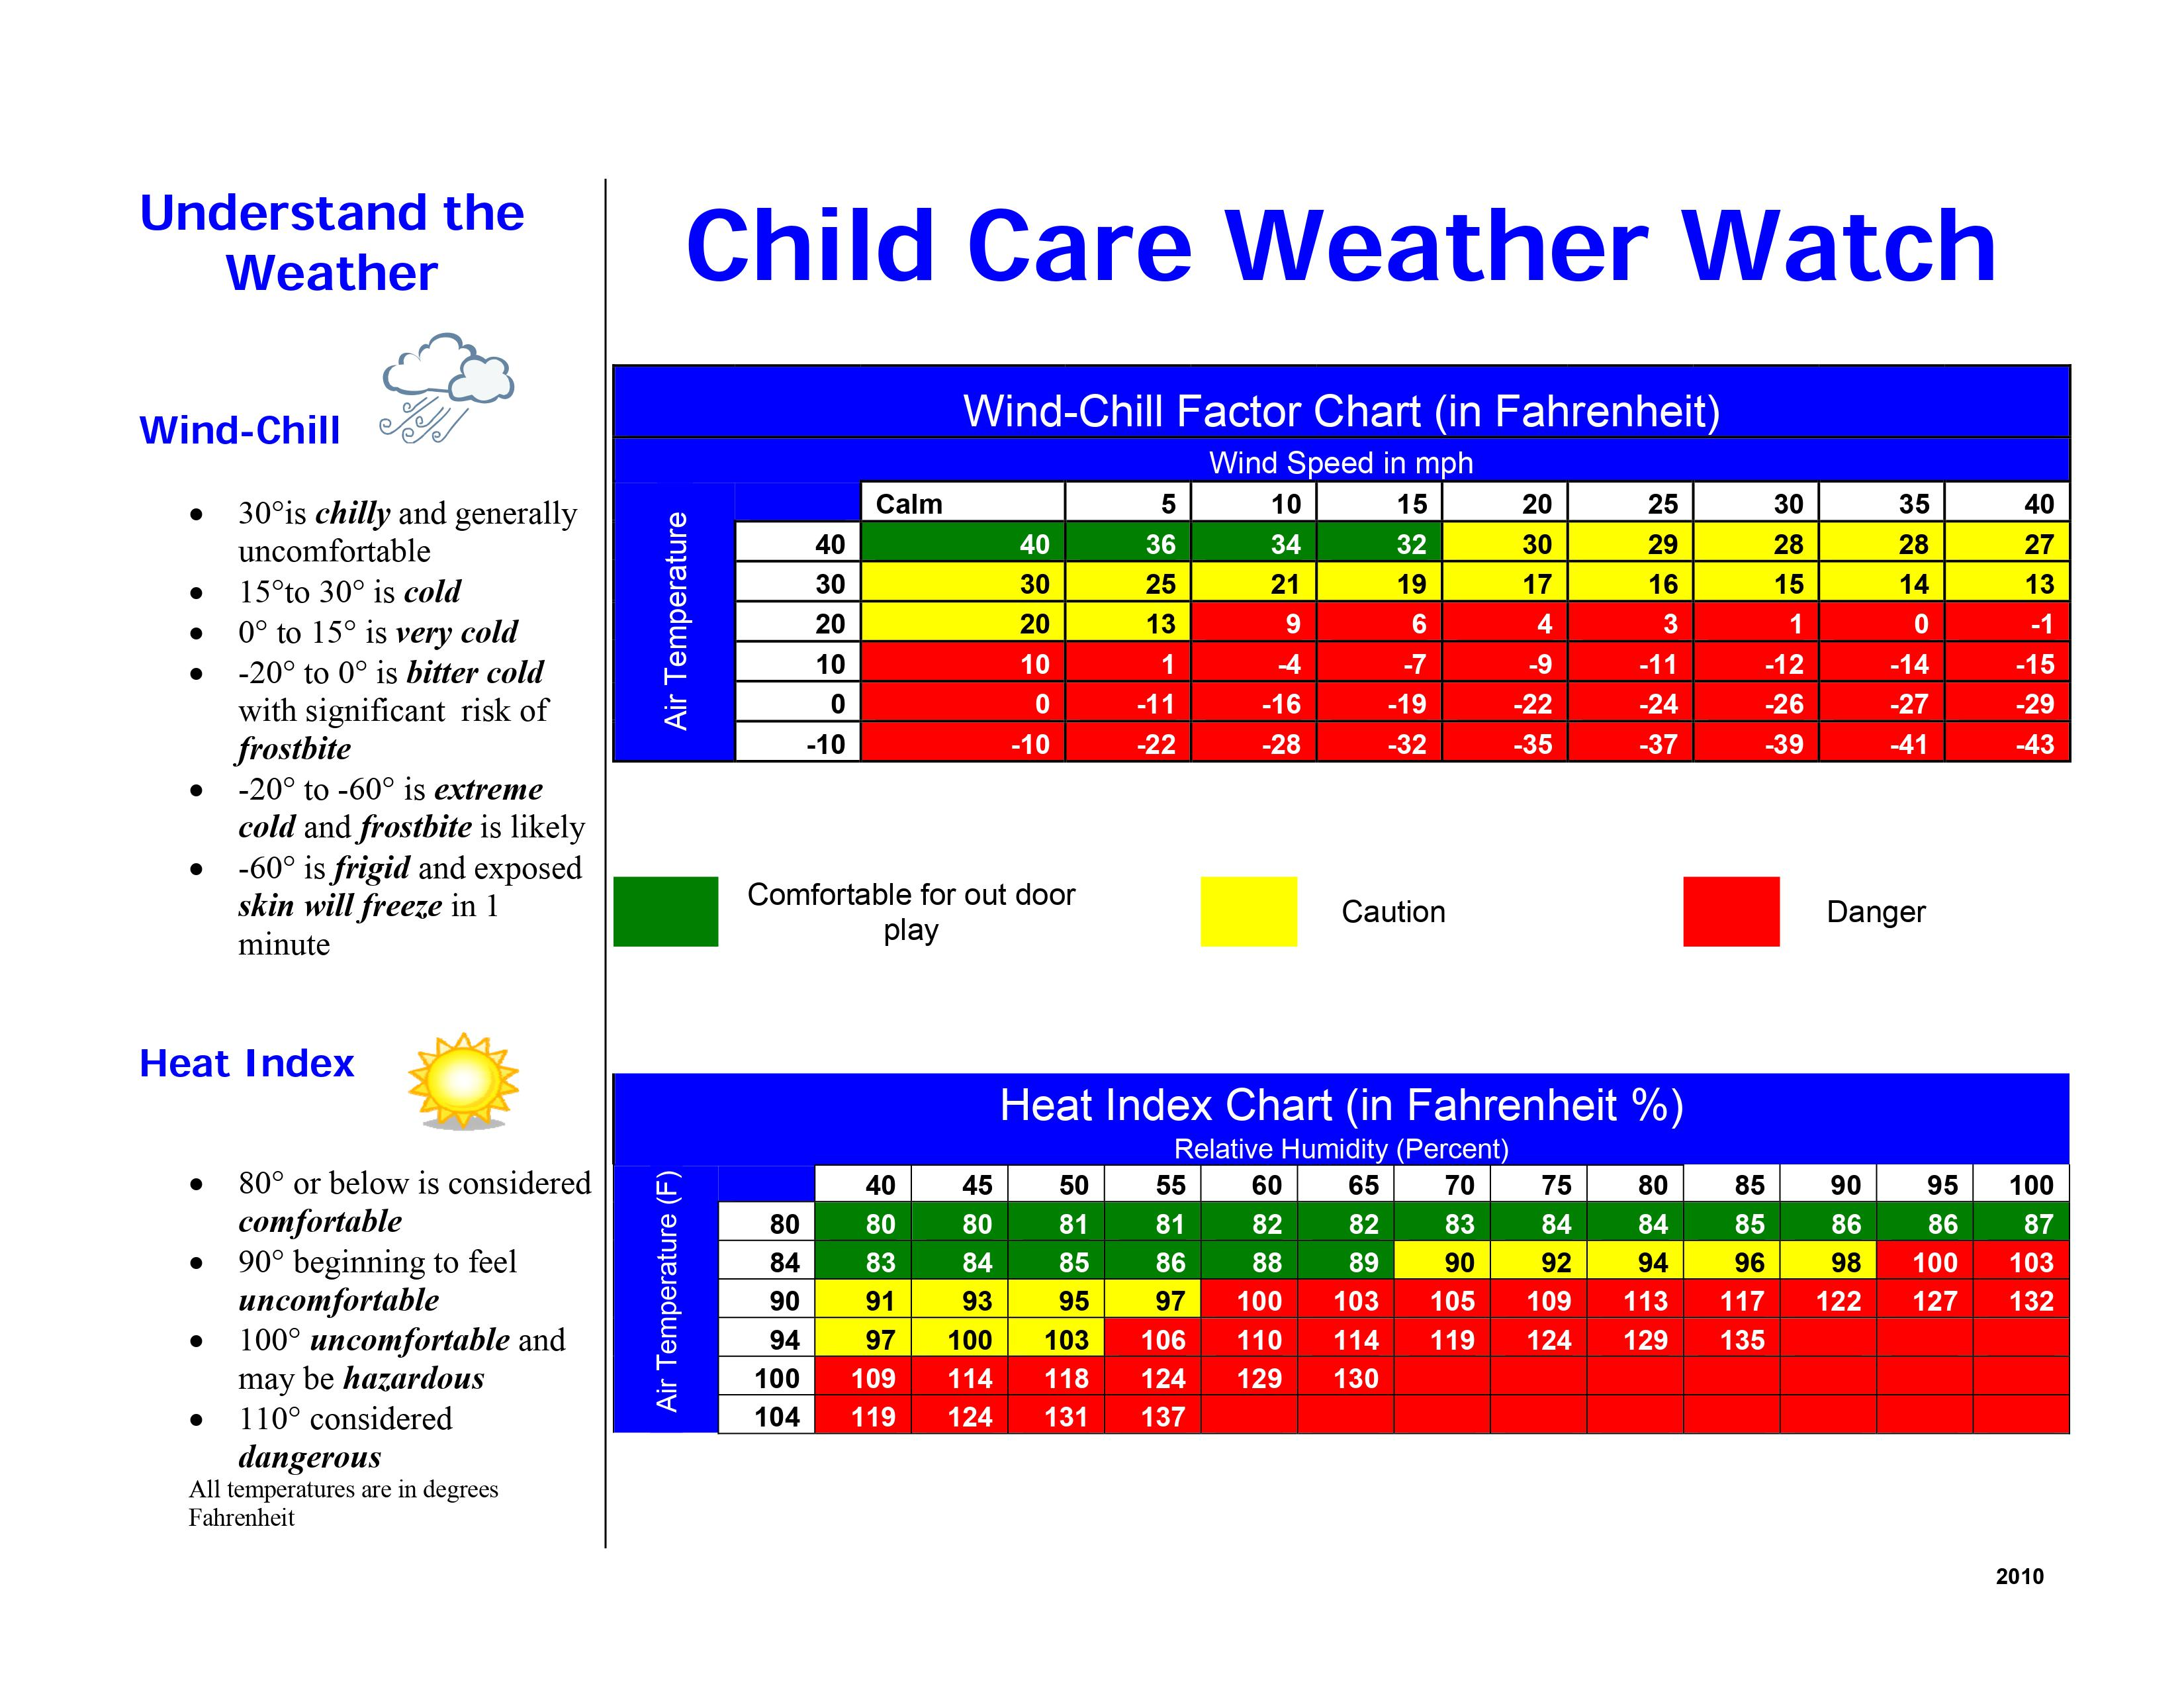 Child Care Weather Watch image Readable/Printable version in link above. 